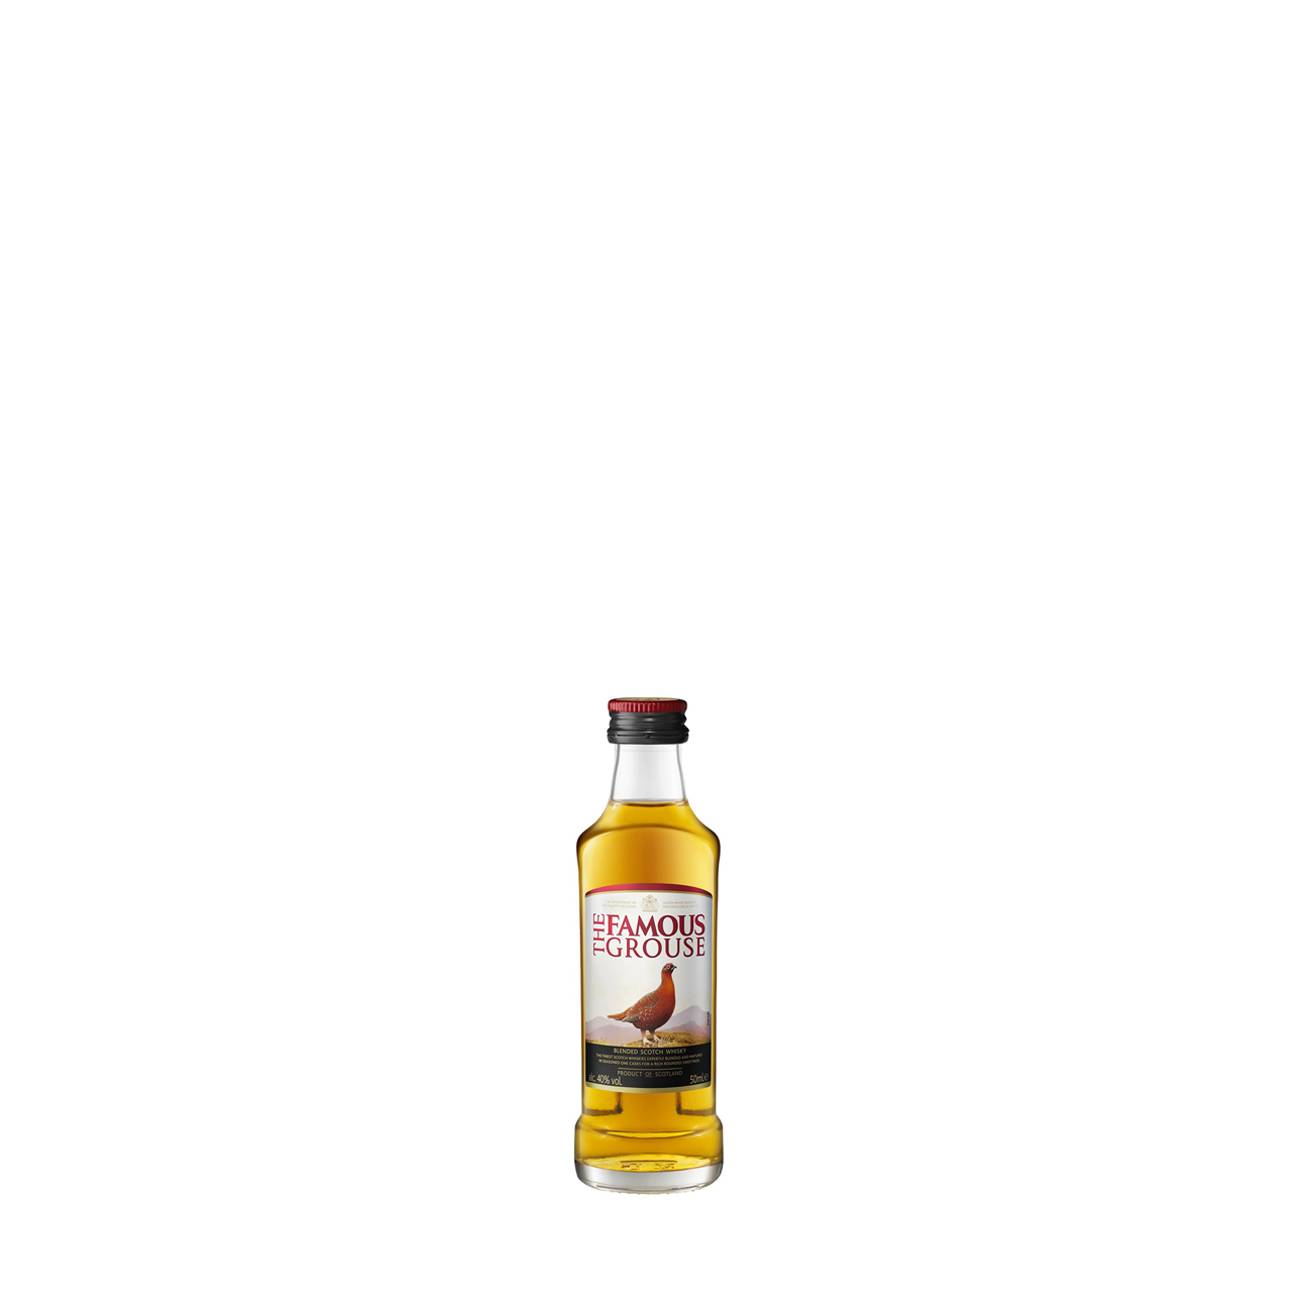 The Famous Grouse Blended Scotch 50 ml Pret Mic Bauturi